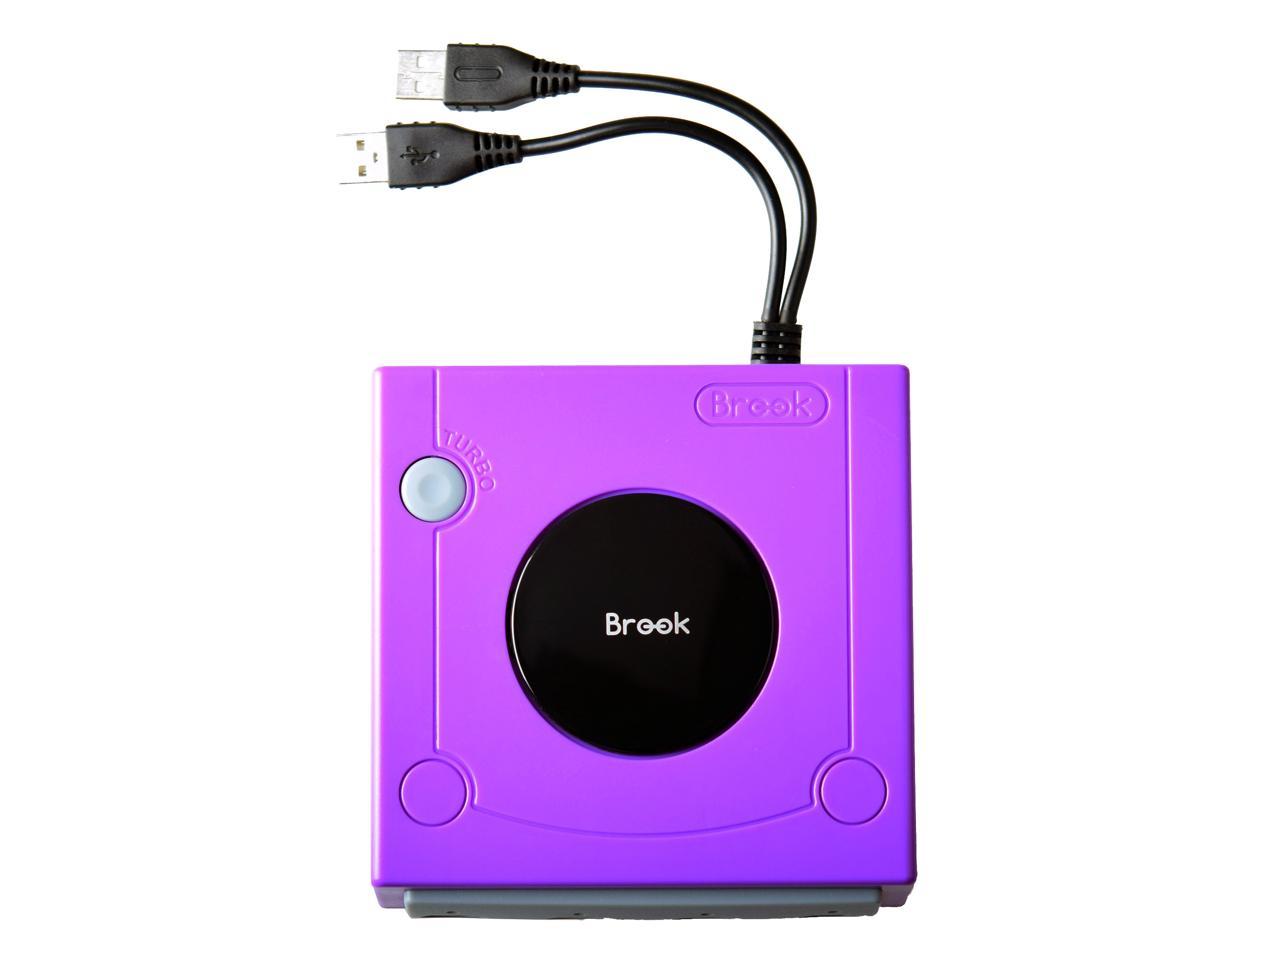 4 Ports Brook Gamecube Controller Adapter For Wii U Pc Usb Android Newegg Com